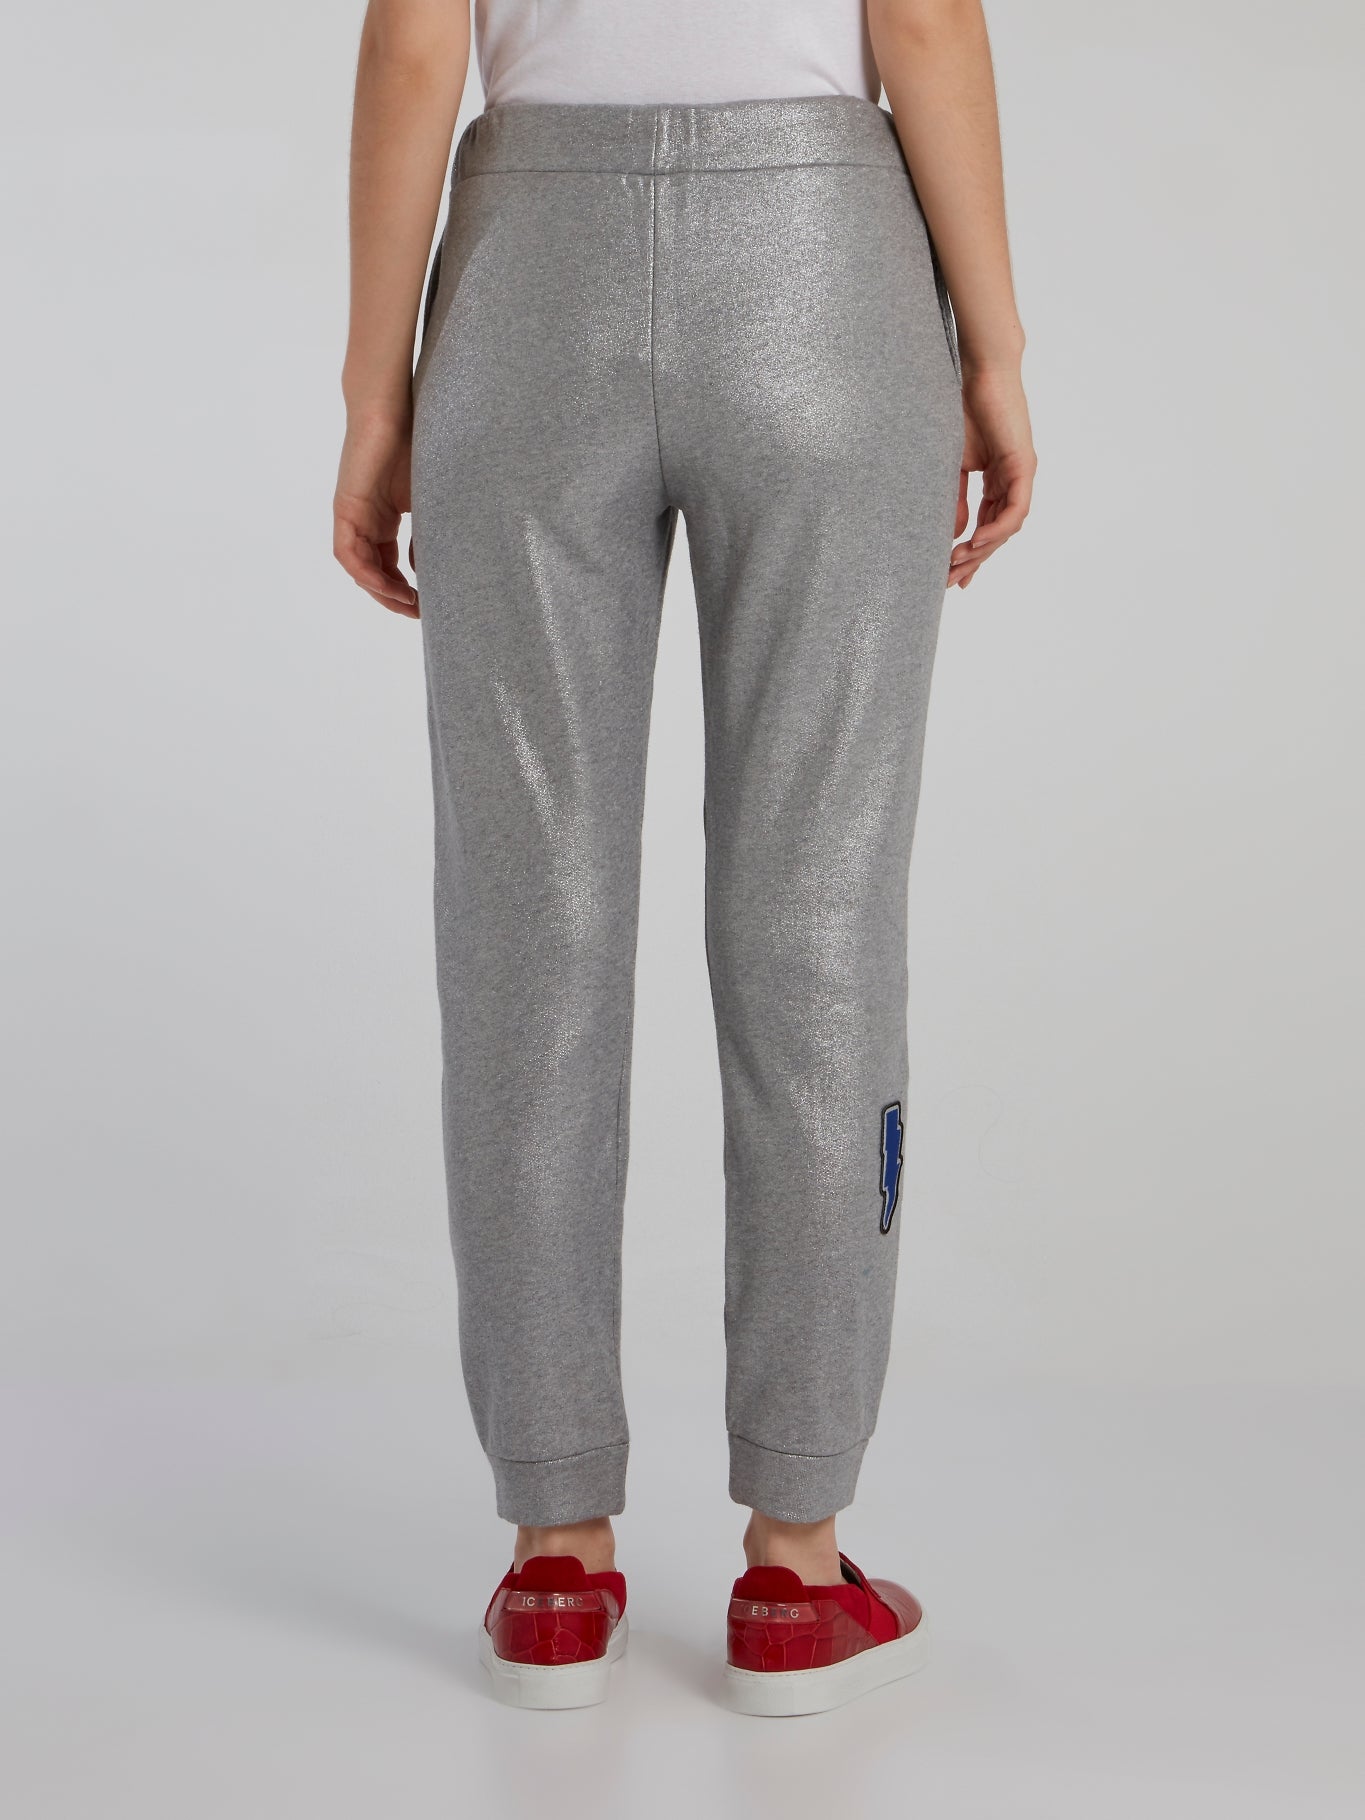 Metallic Patched Track Pants